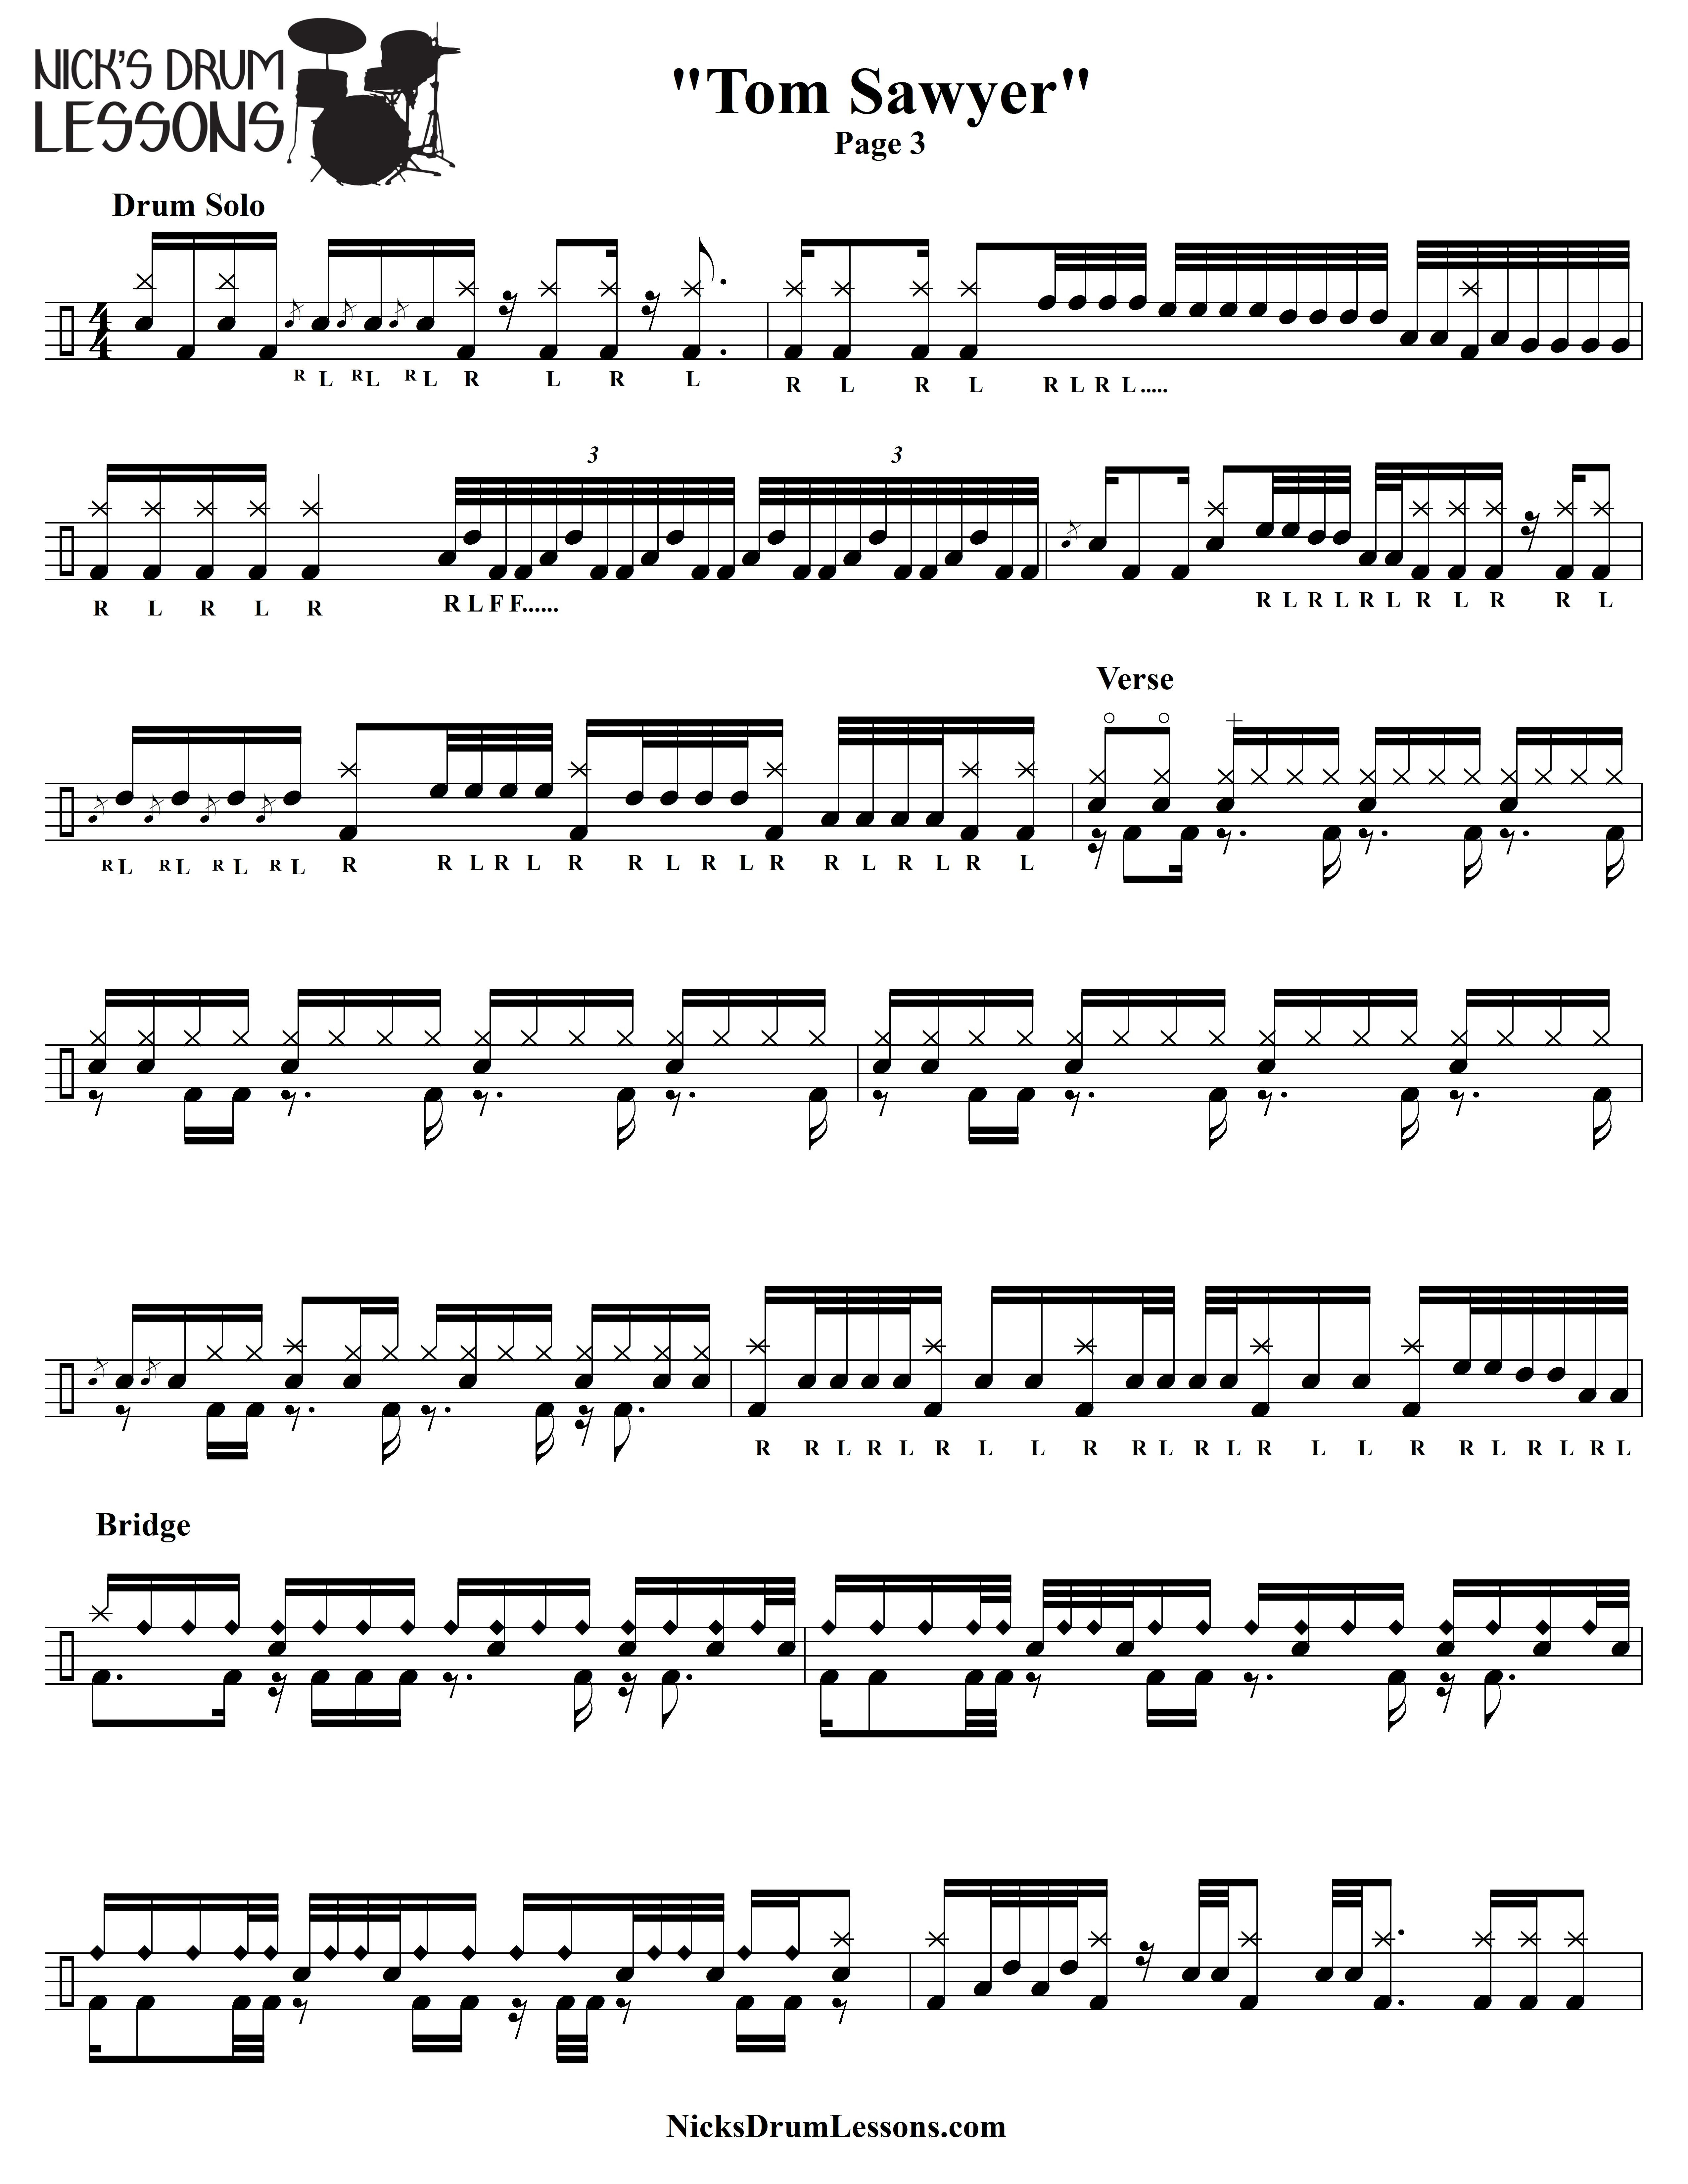 free-printable-sheet-music-for-drums-download-them-or-print-free-printable-drum-sheet-music